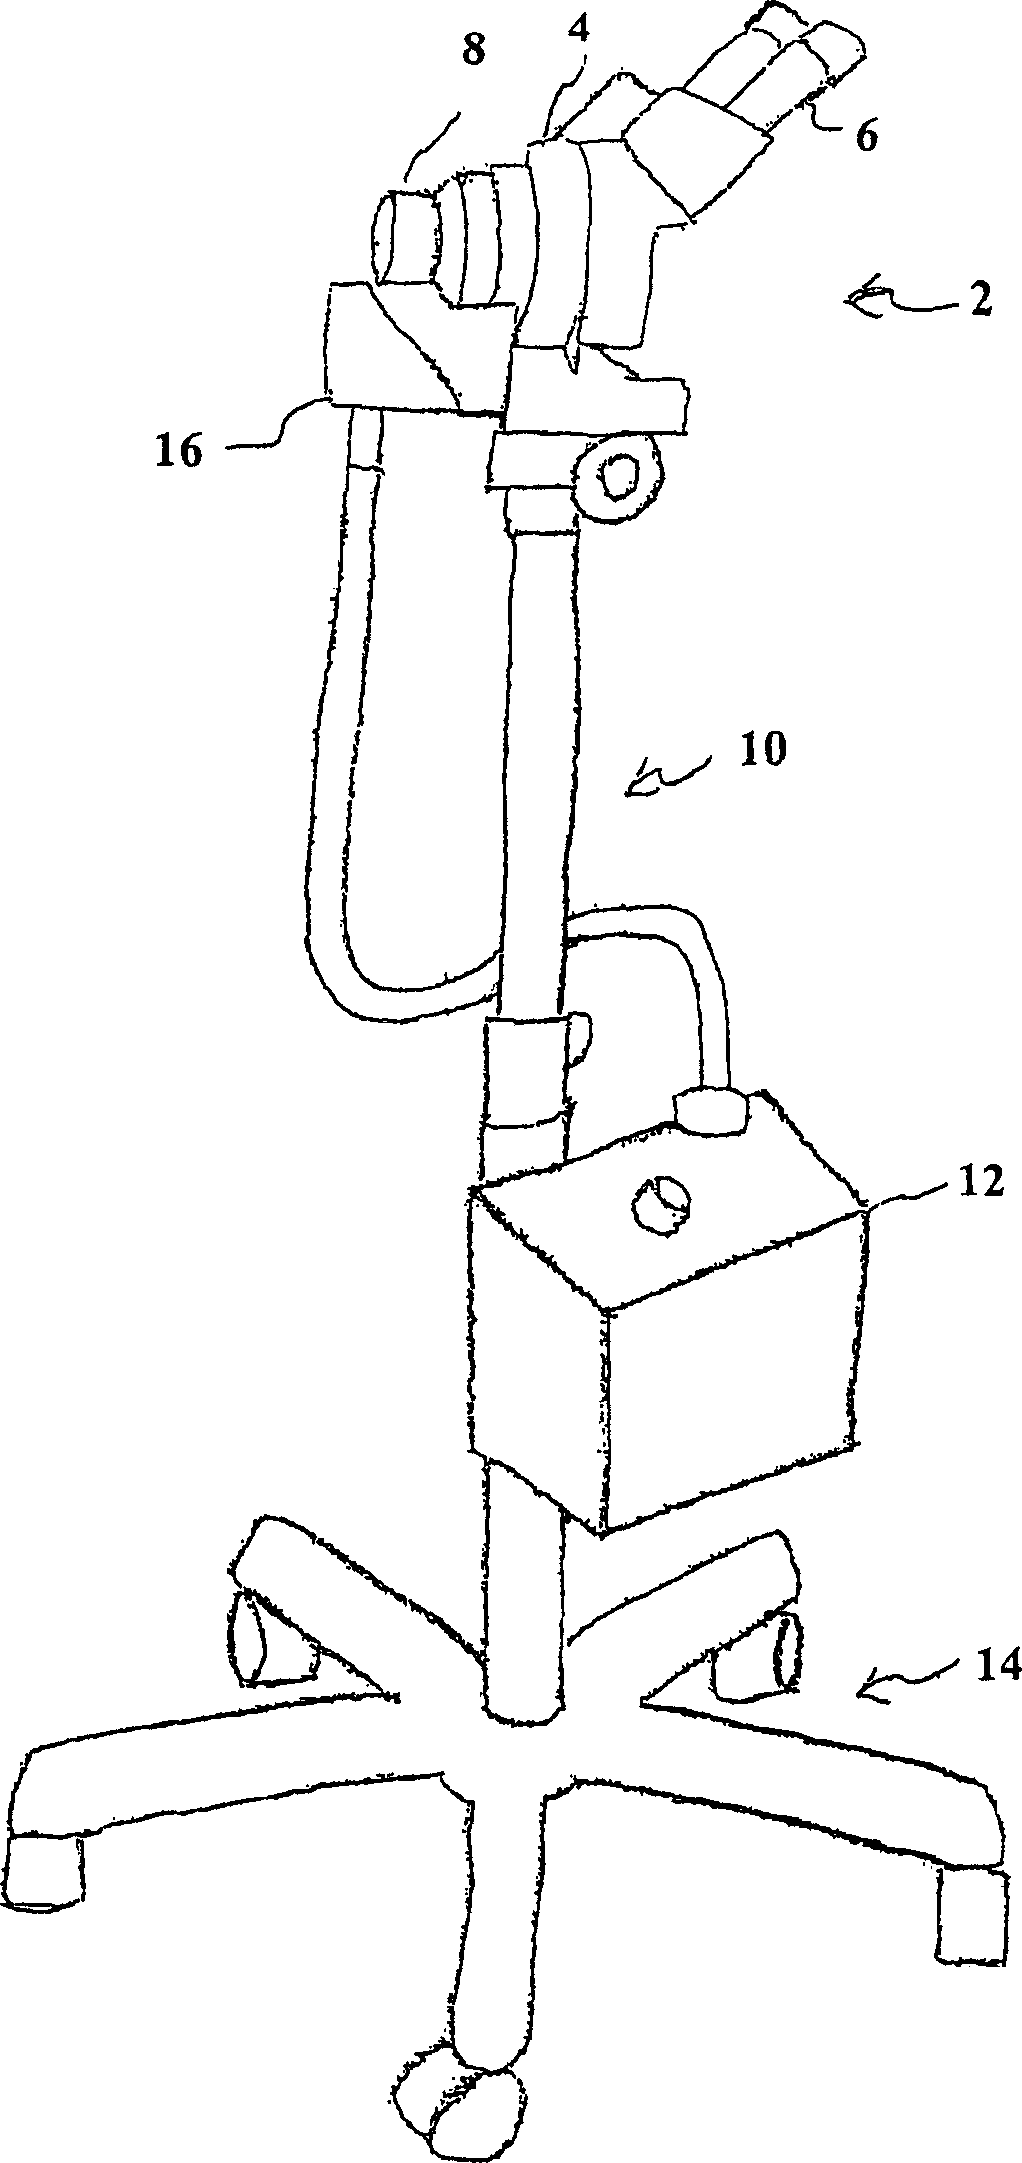 Systems and methods relating to colposcopic viewing tubes for enhanced viewing andexamination